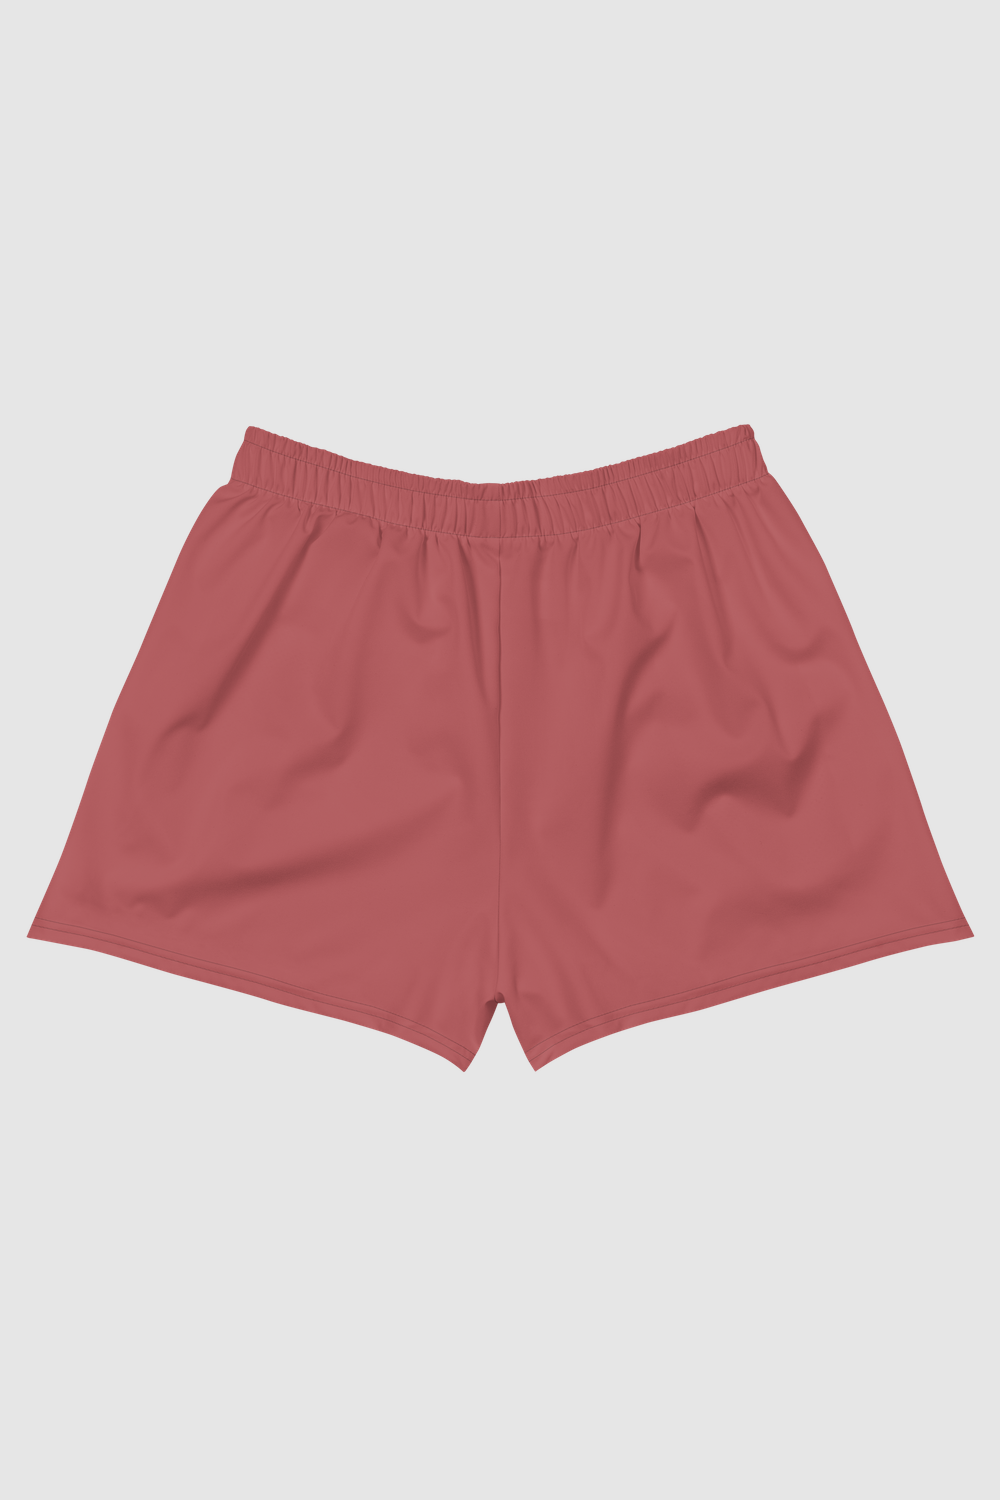 Mineral Red Women’s Recycled Athletic Shorts